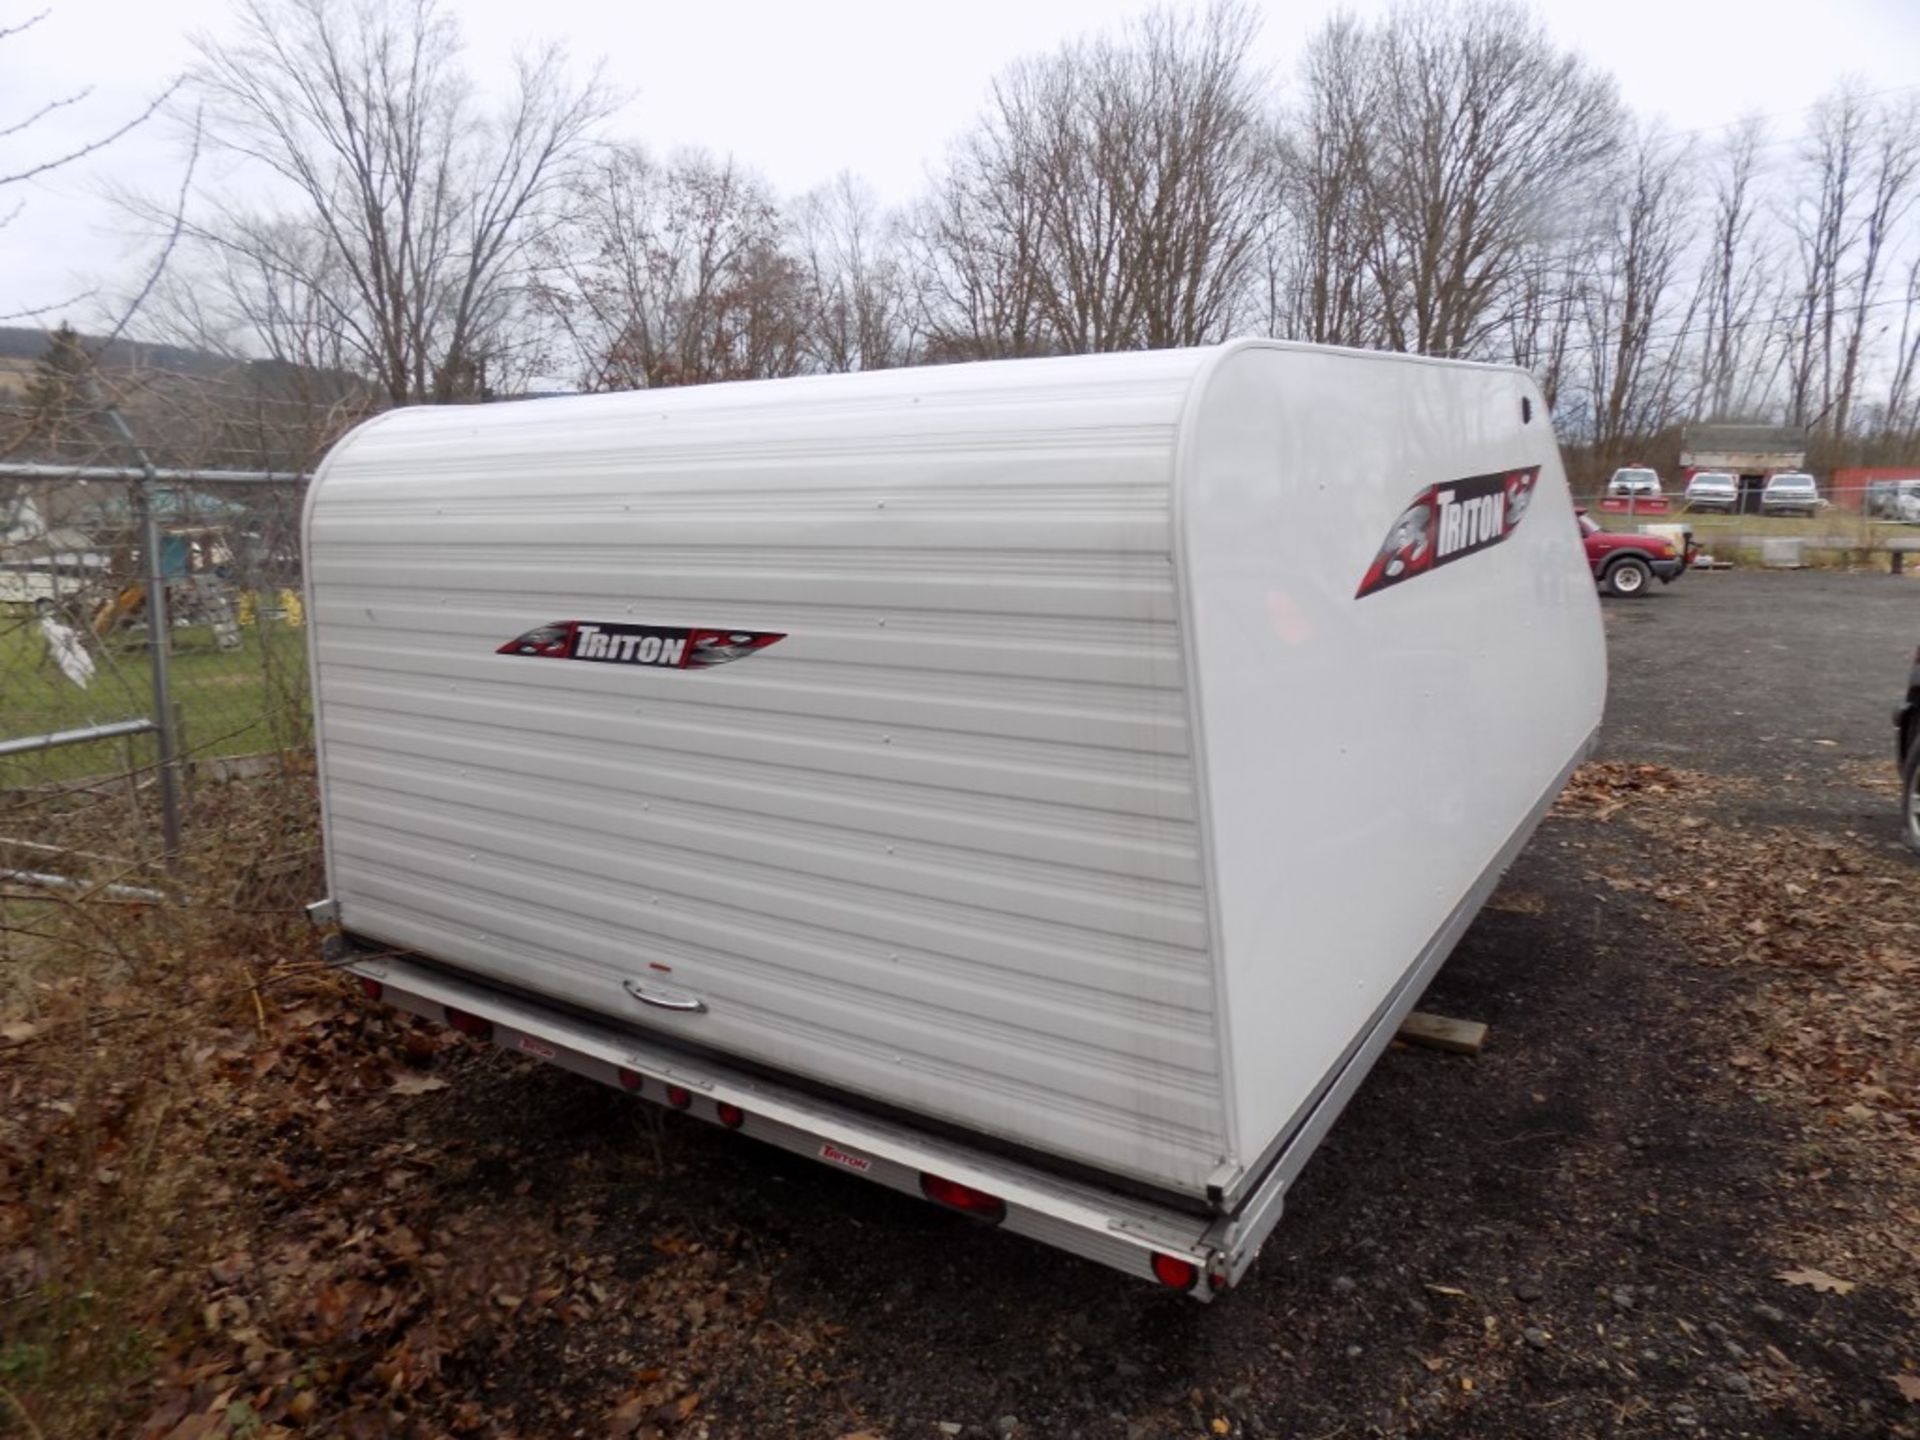 2015 Triton 2-Sled Snowmobile Trailer, GVW 2200lbs, White, Vin# 4TCSS1123FHW11016 - Trailer is in - Image 7 of 7